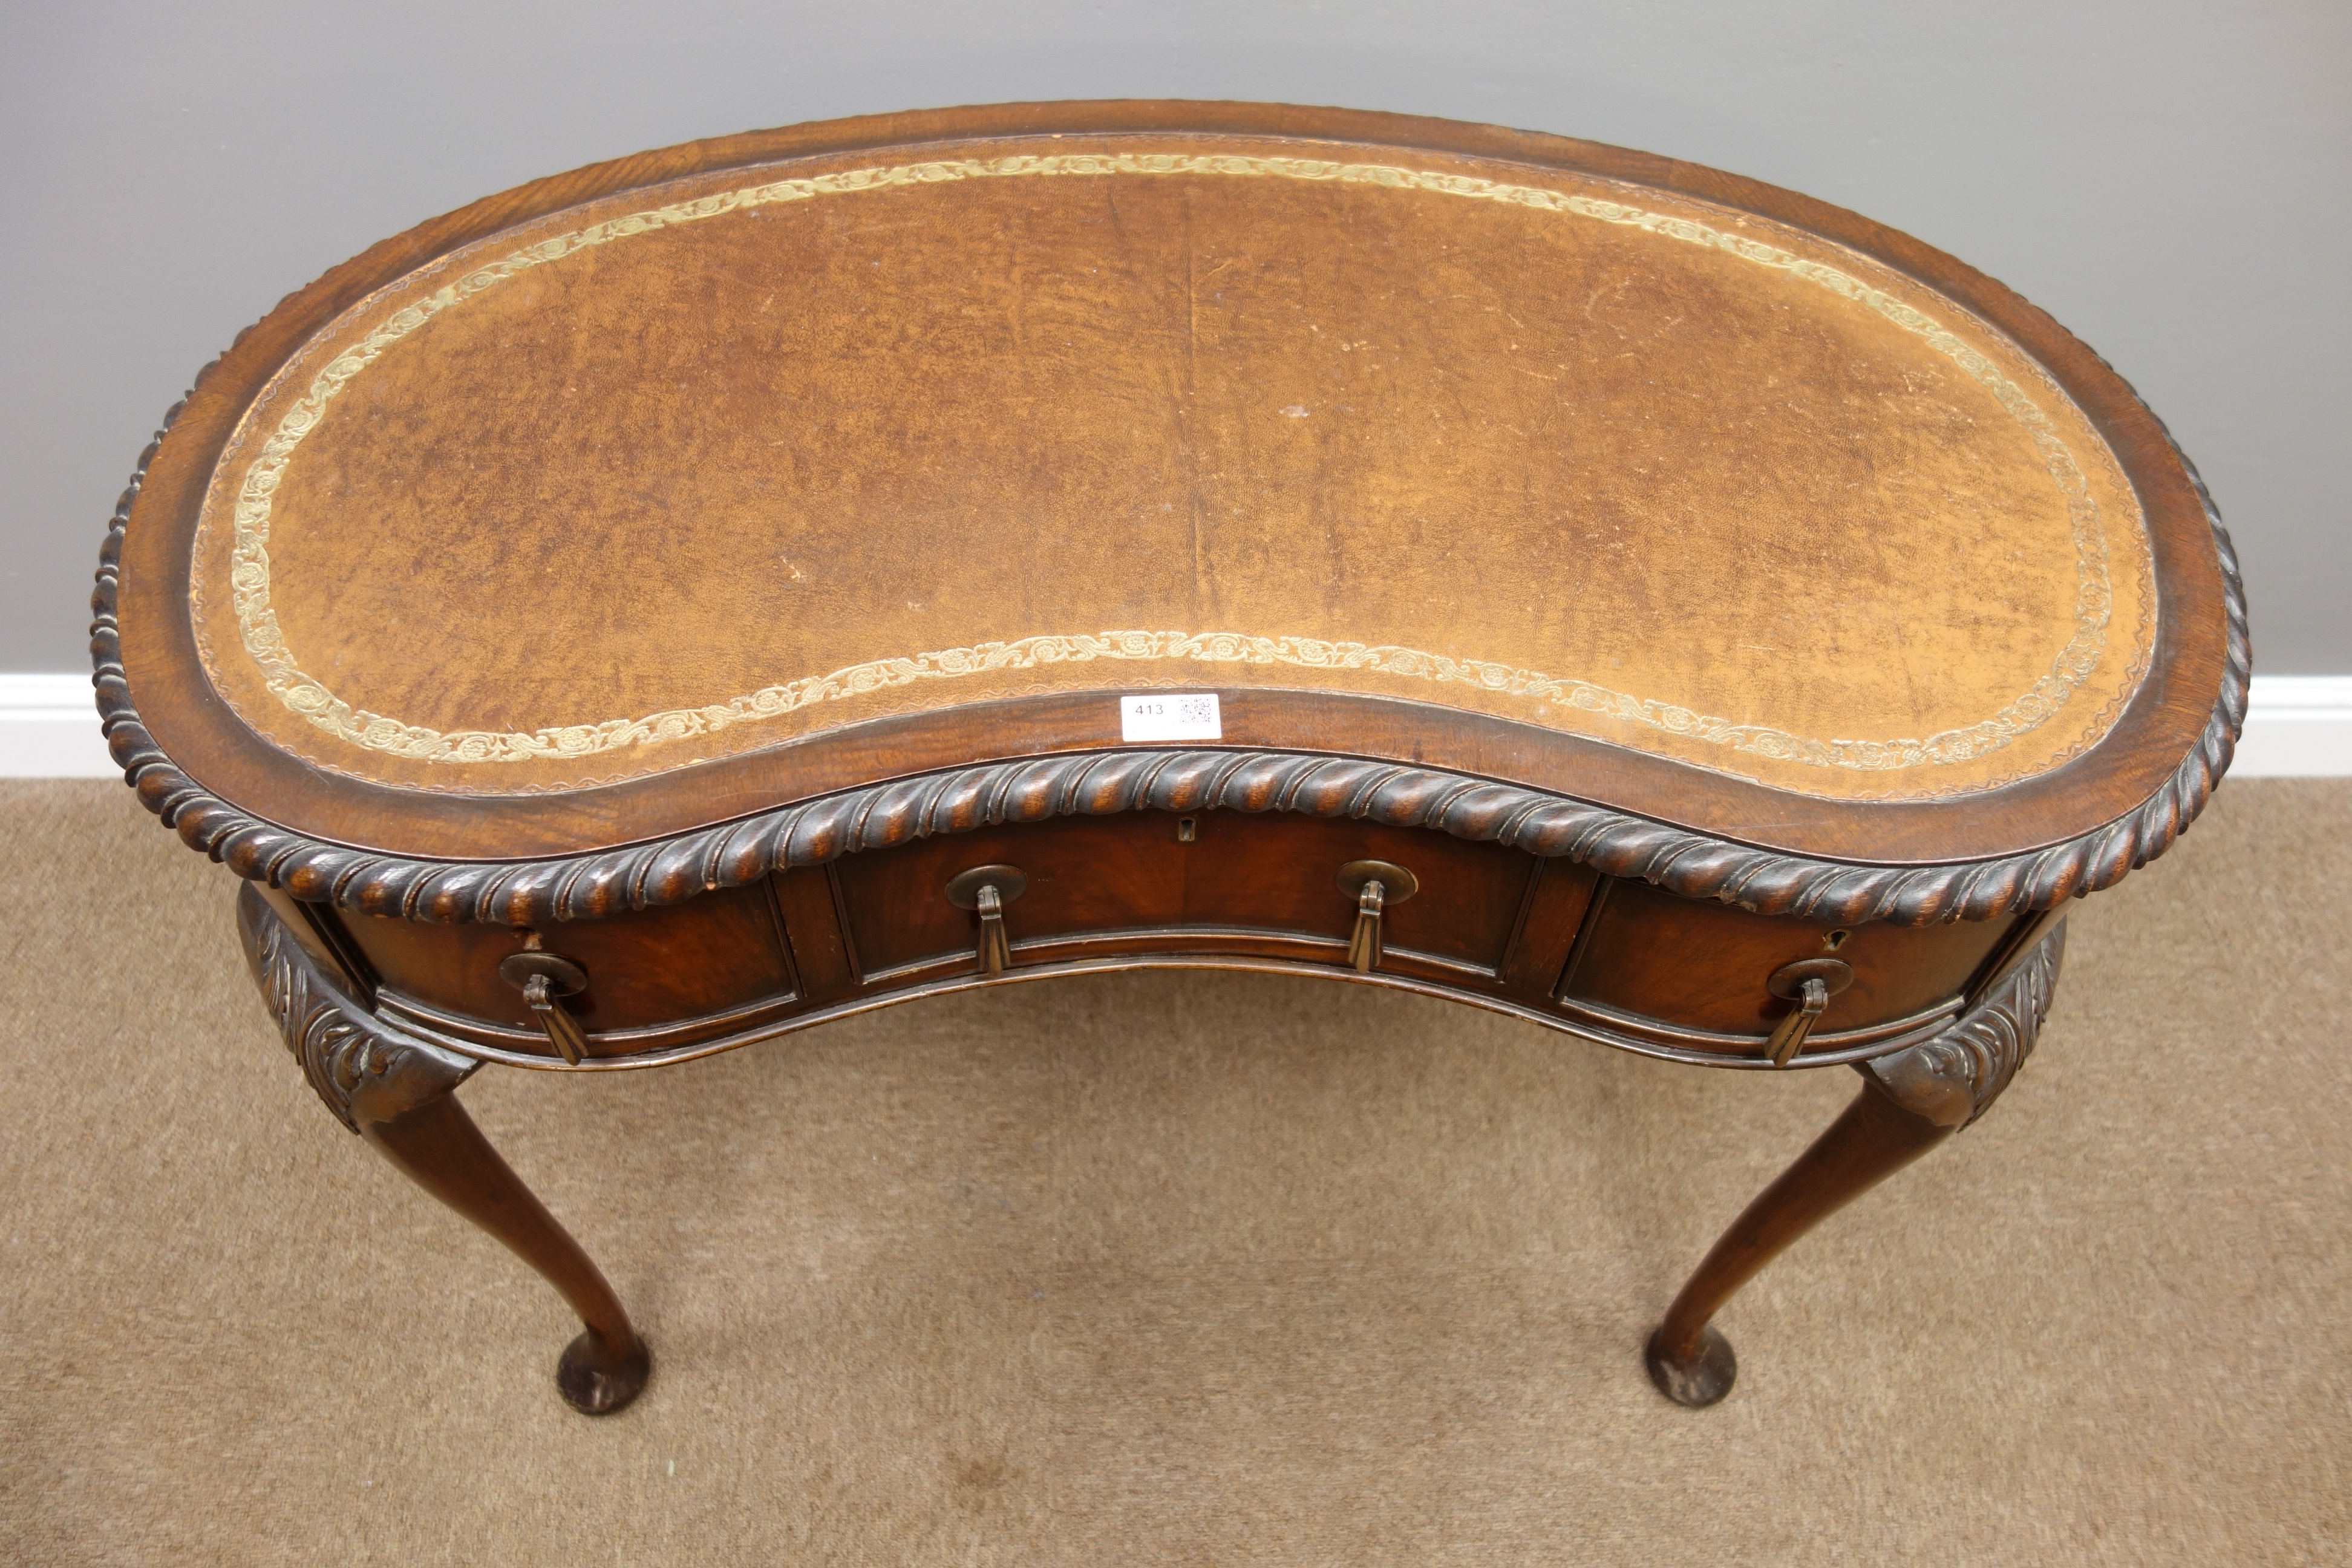 Early 20th century mahogany writing desk, kidney shaped top with gadroon moulding, - Image 5 of 5